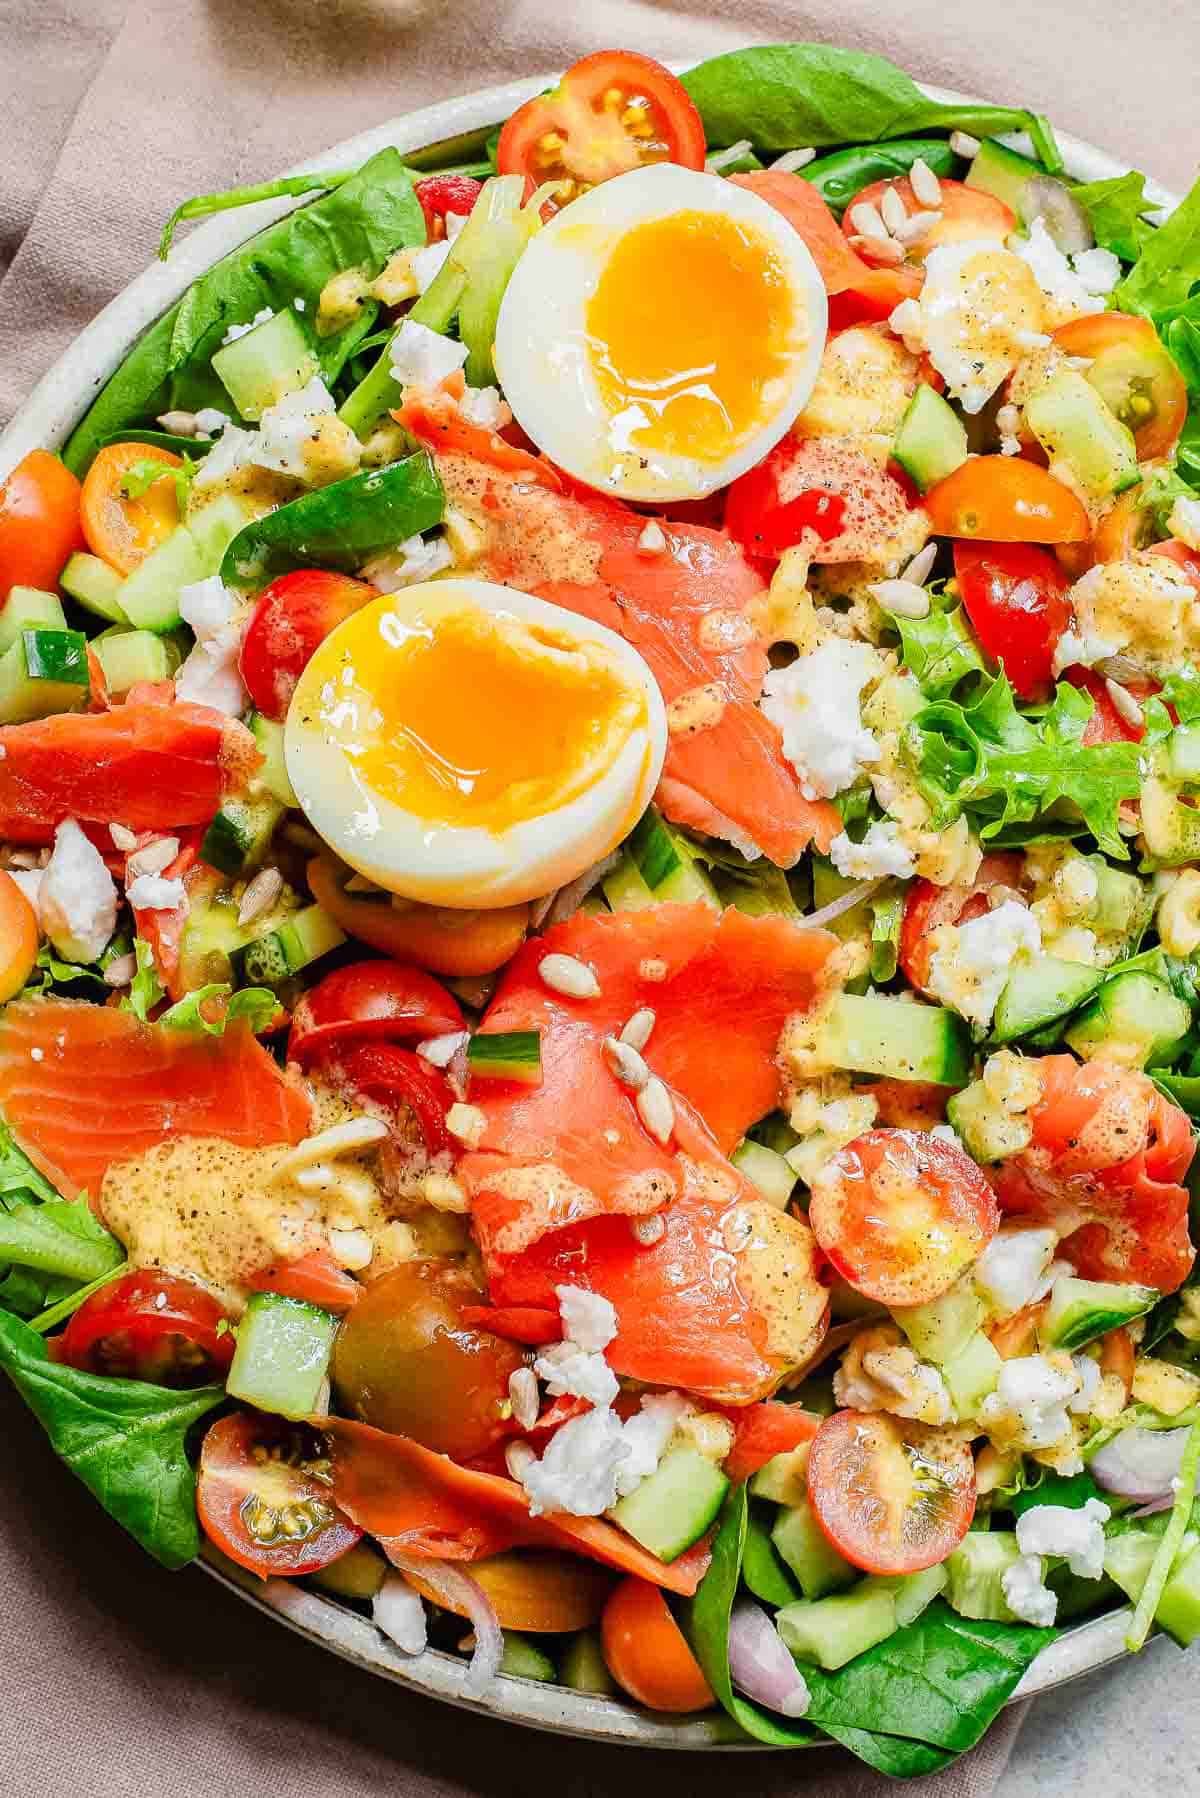 A colorful salad with smoked salmon, halved boiled egg, cucumbers, tomatoes, and mixed greens, sprinkled with seeds.